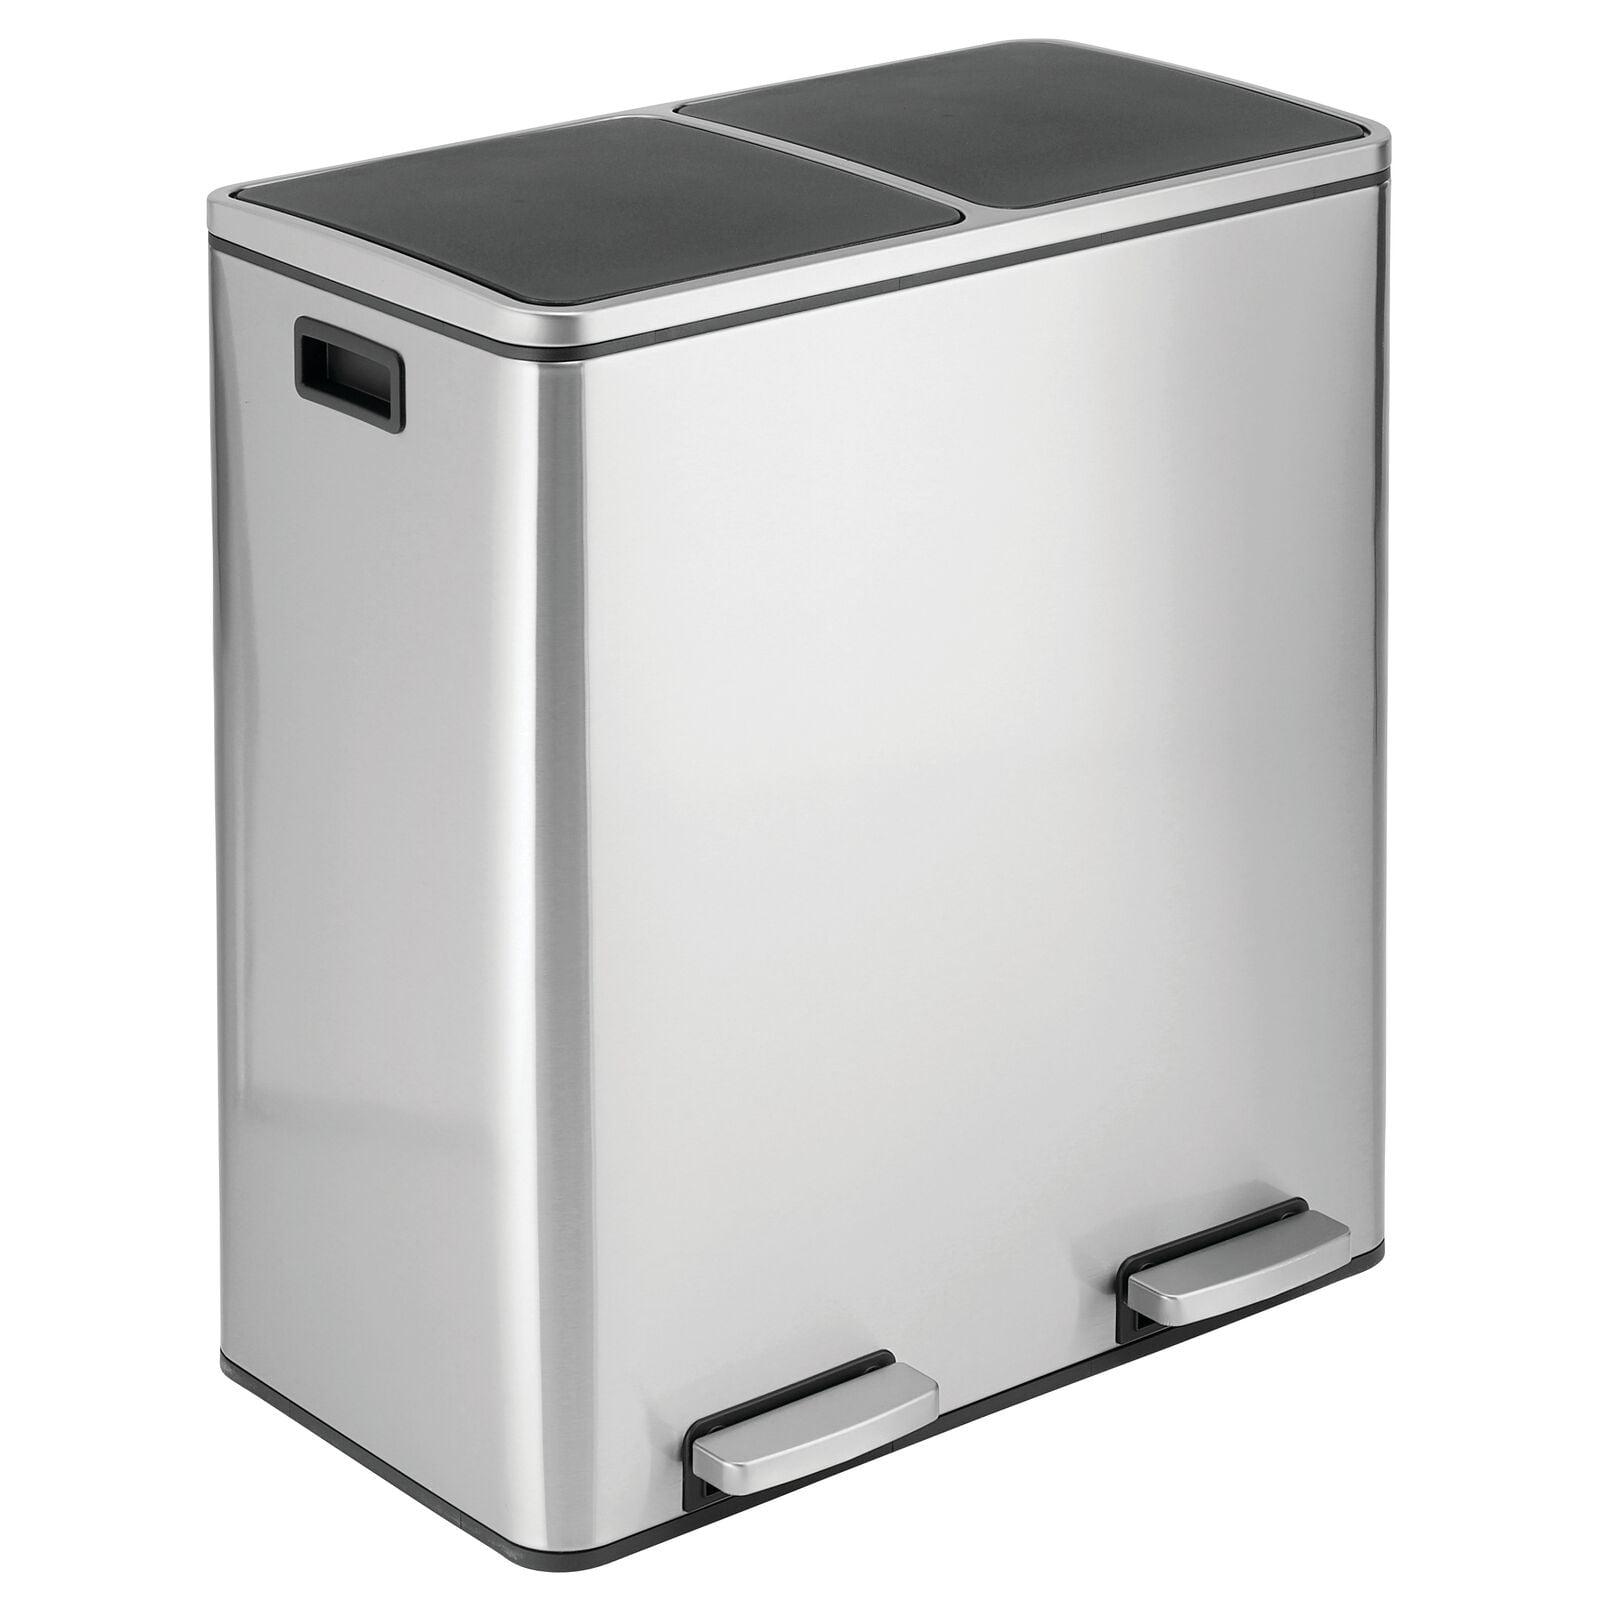 Details about   50 Liter Dual Compartment 28 Liter & 18 Liter Stainless Steel Recycle Trash Bin 